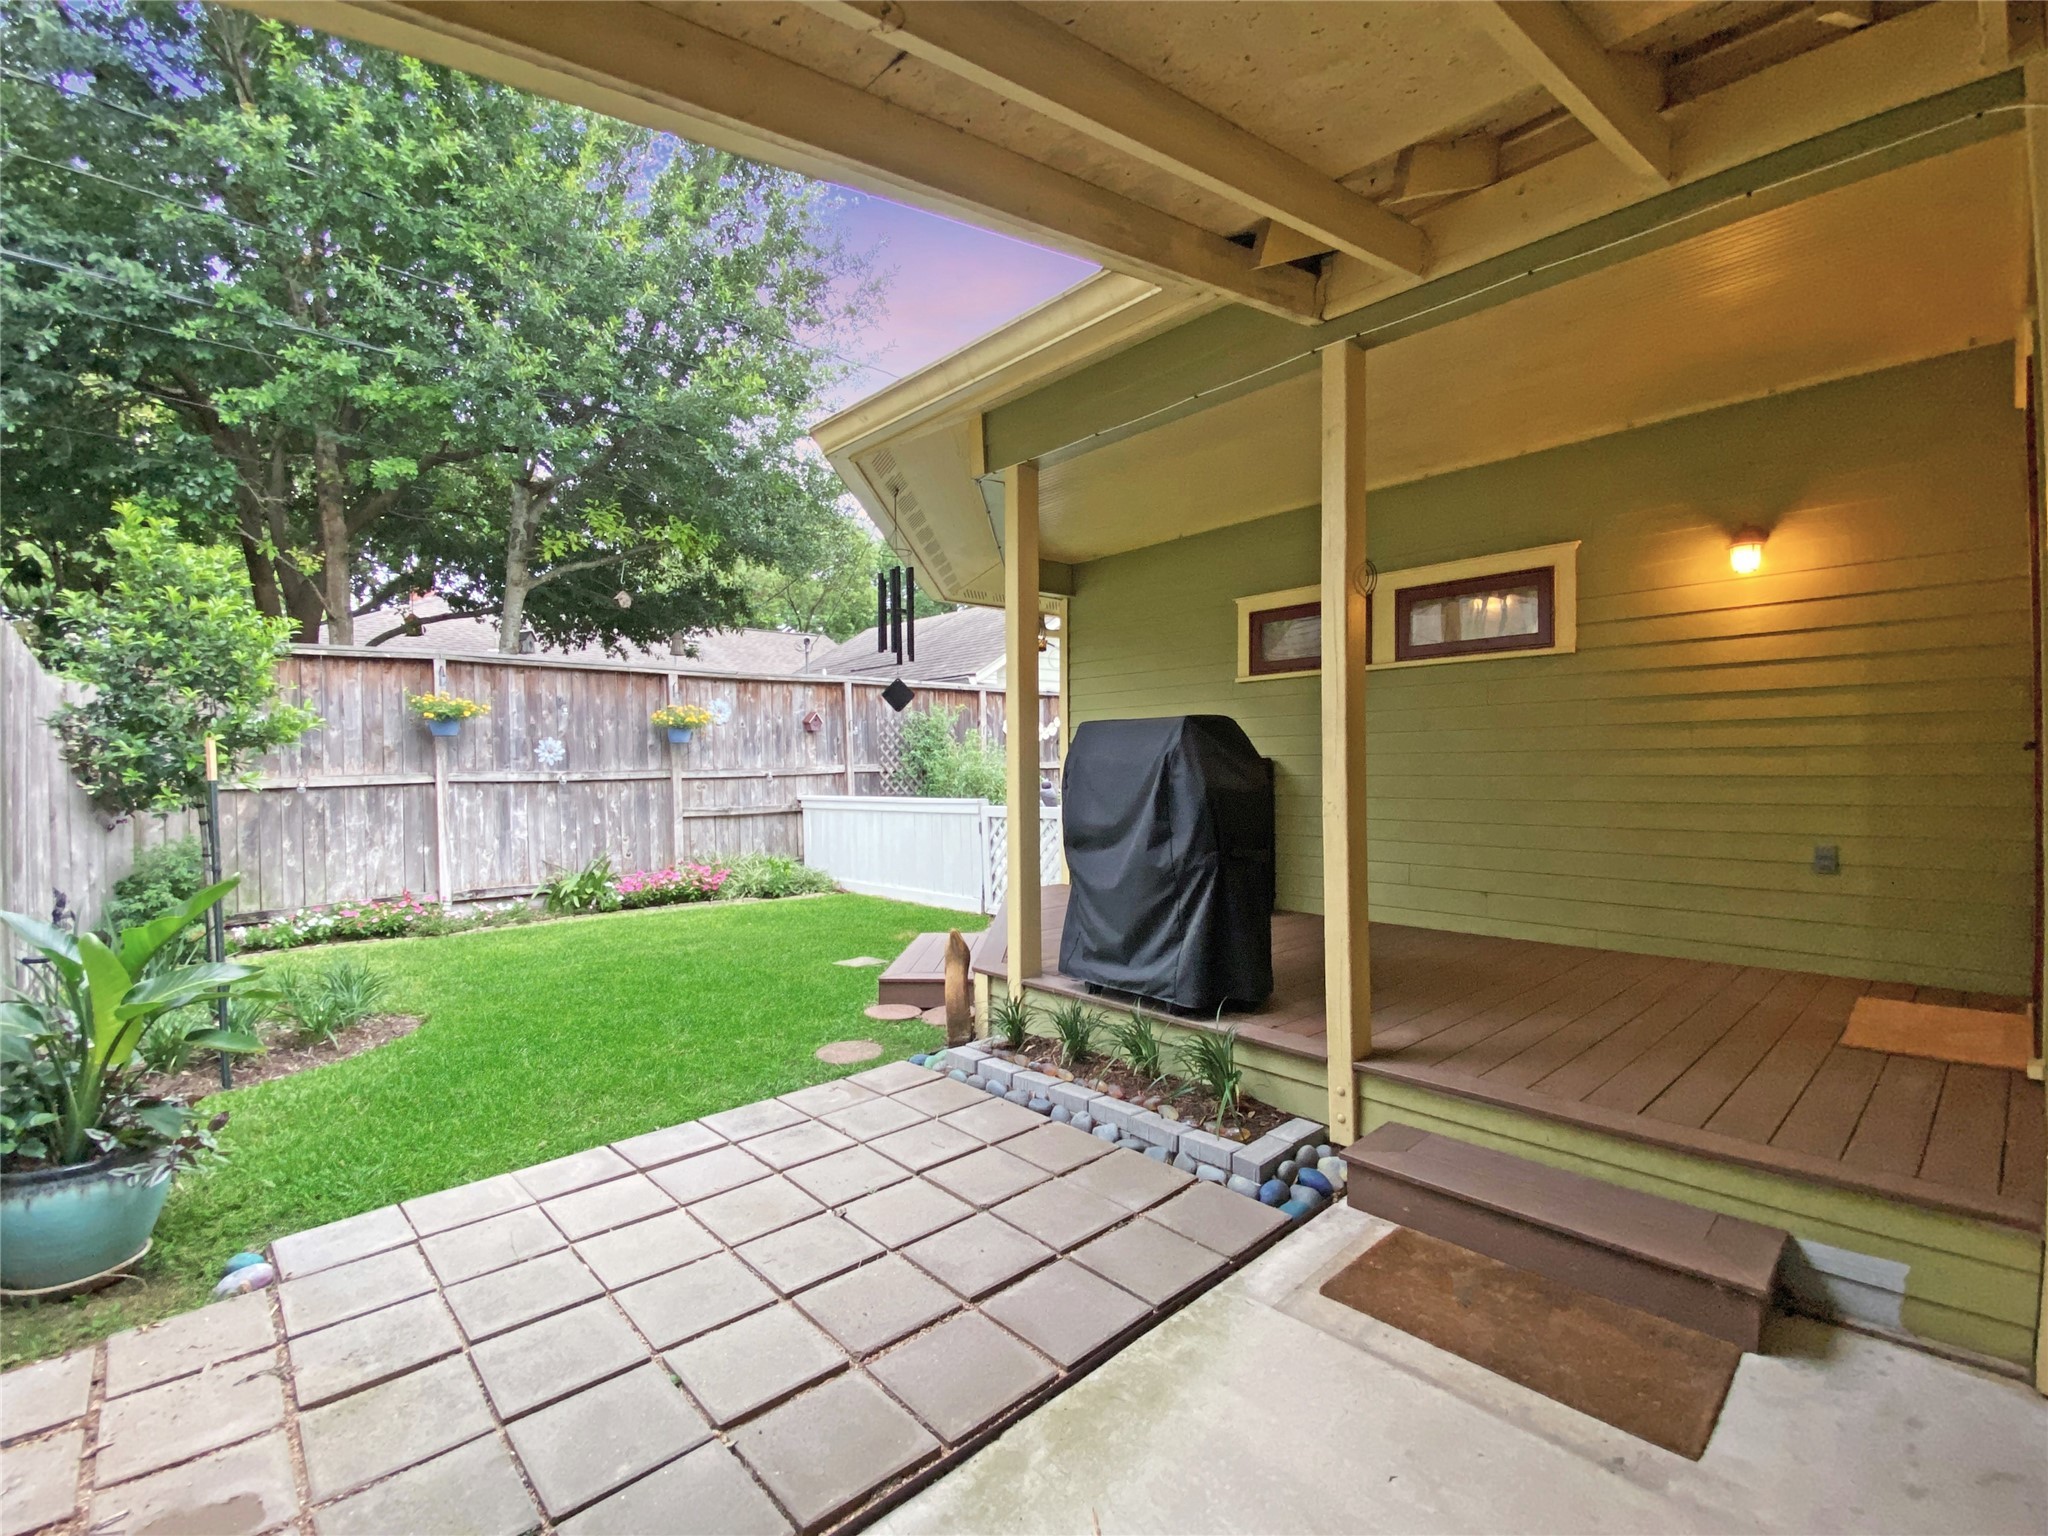 This covered deck next to the covered carport is located just outside of the kitchen and flex room and is your back door.